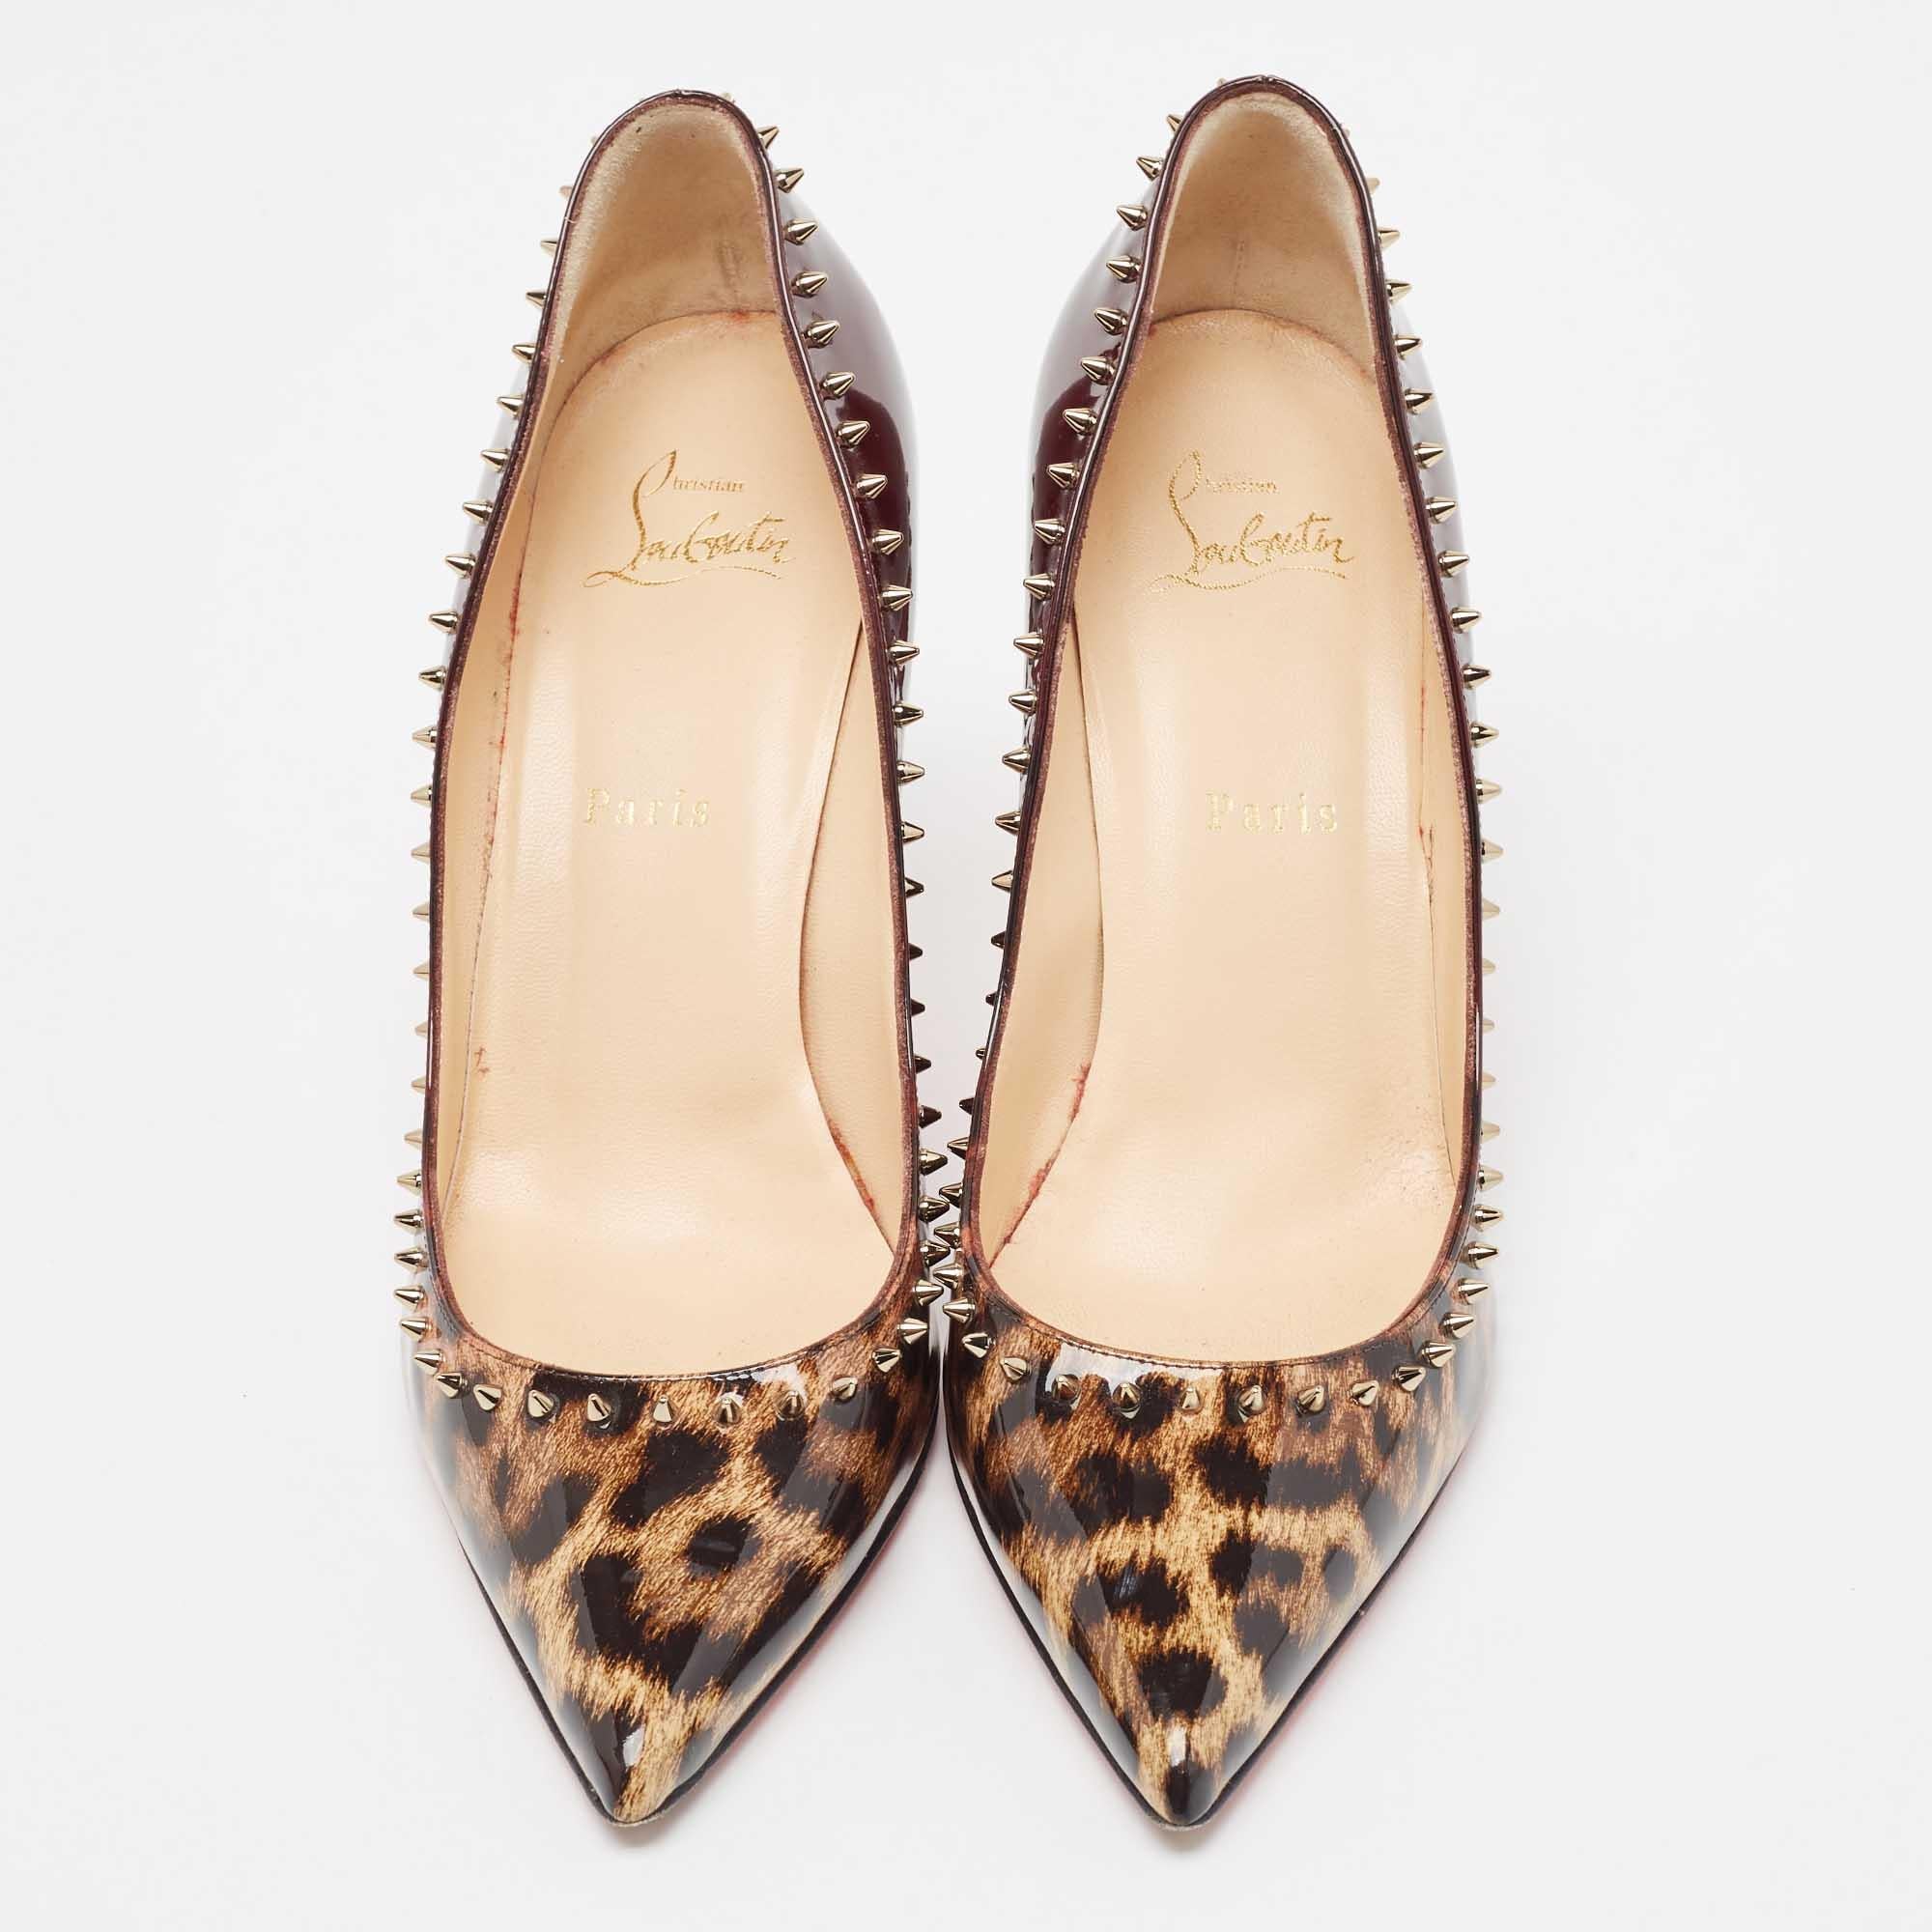 Think of shoes and Christian Louboutin is the first name that comes to our minds. These exquisite pumps are worth splurging on. Crafted from patent leather, these sandals carry a leopard print all over and spike embellishments. They are complete